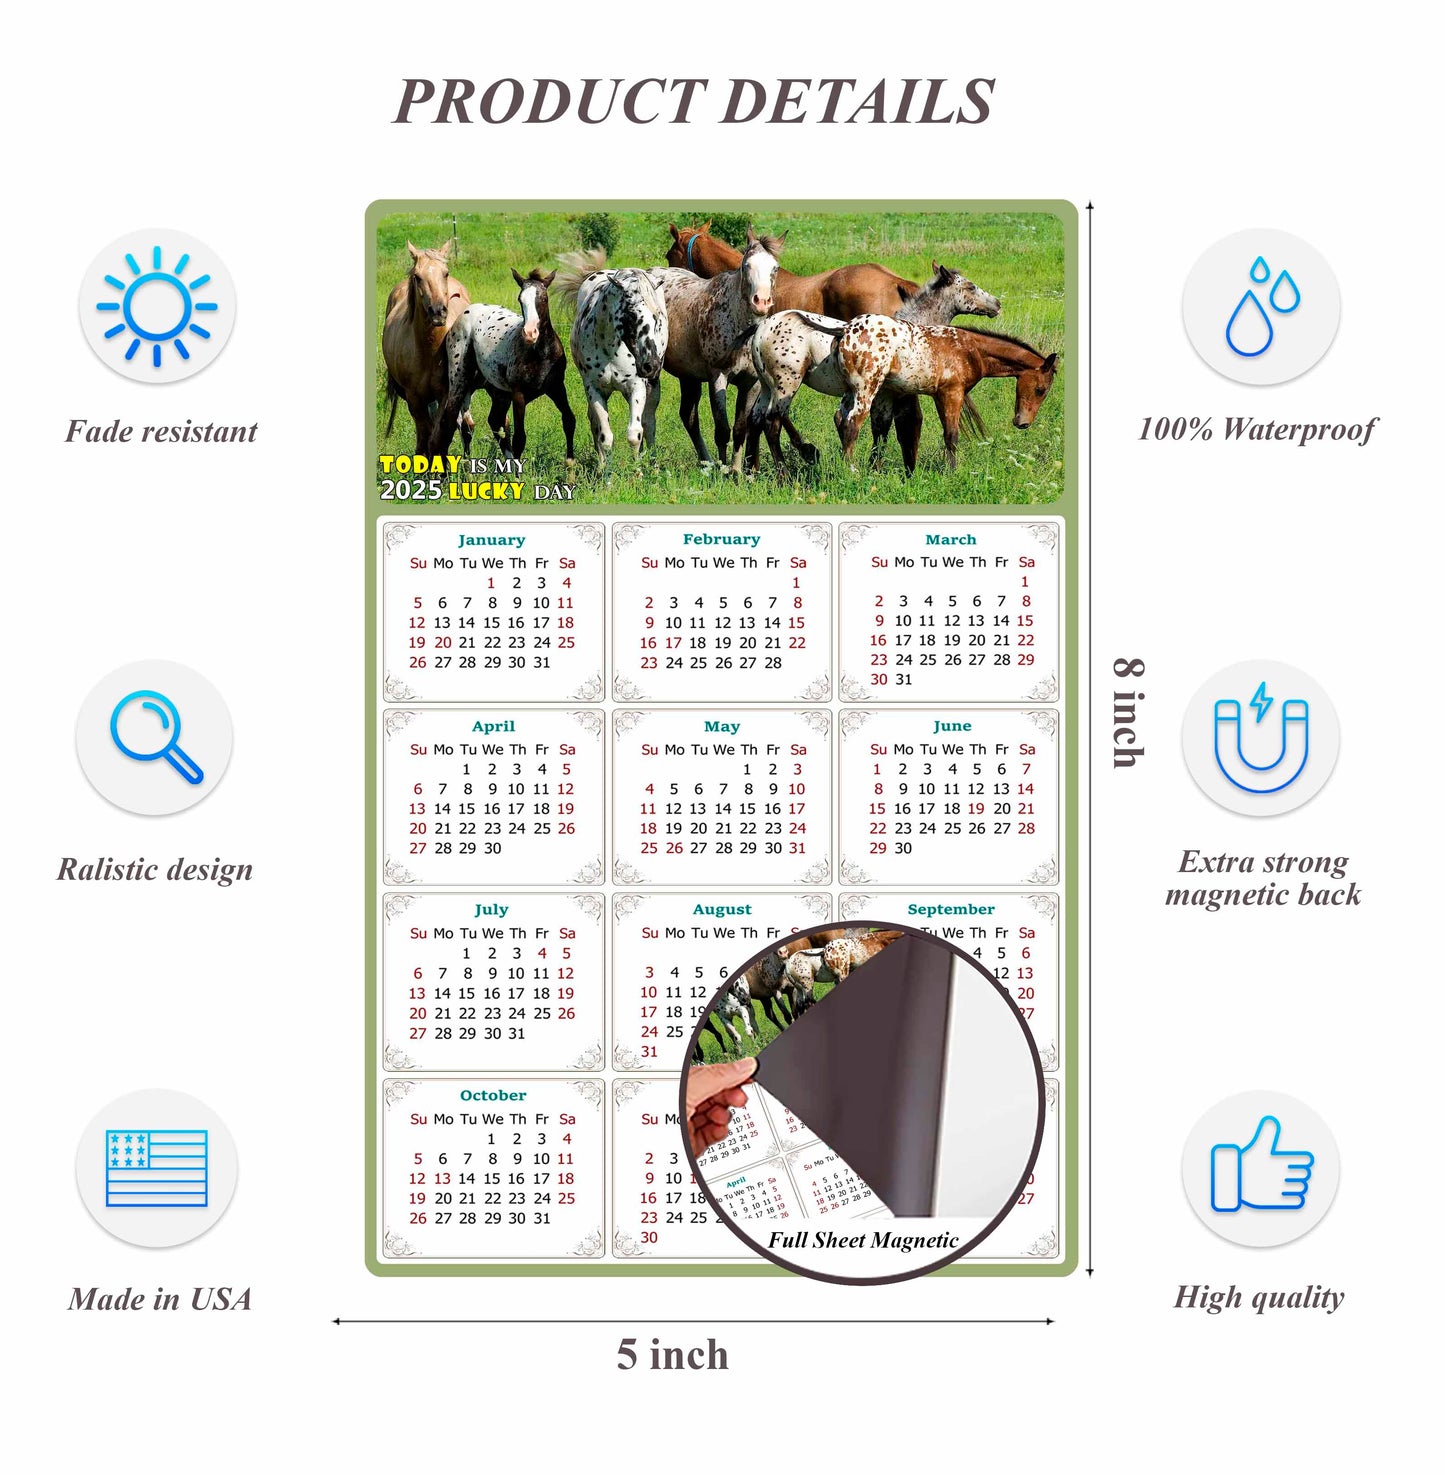 2025 Magnetic Calendar - Calendar Magnets - Today is my Lucky Day - (Fade, Tear, and Water Resistant) - Horses Themed 02